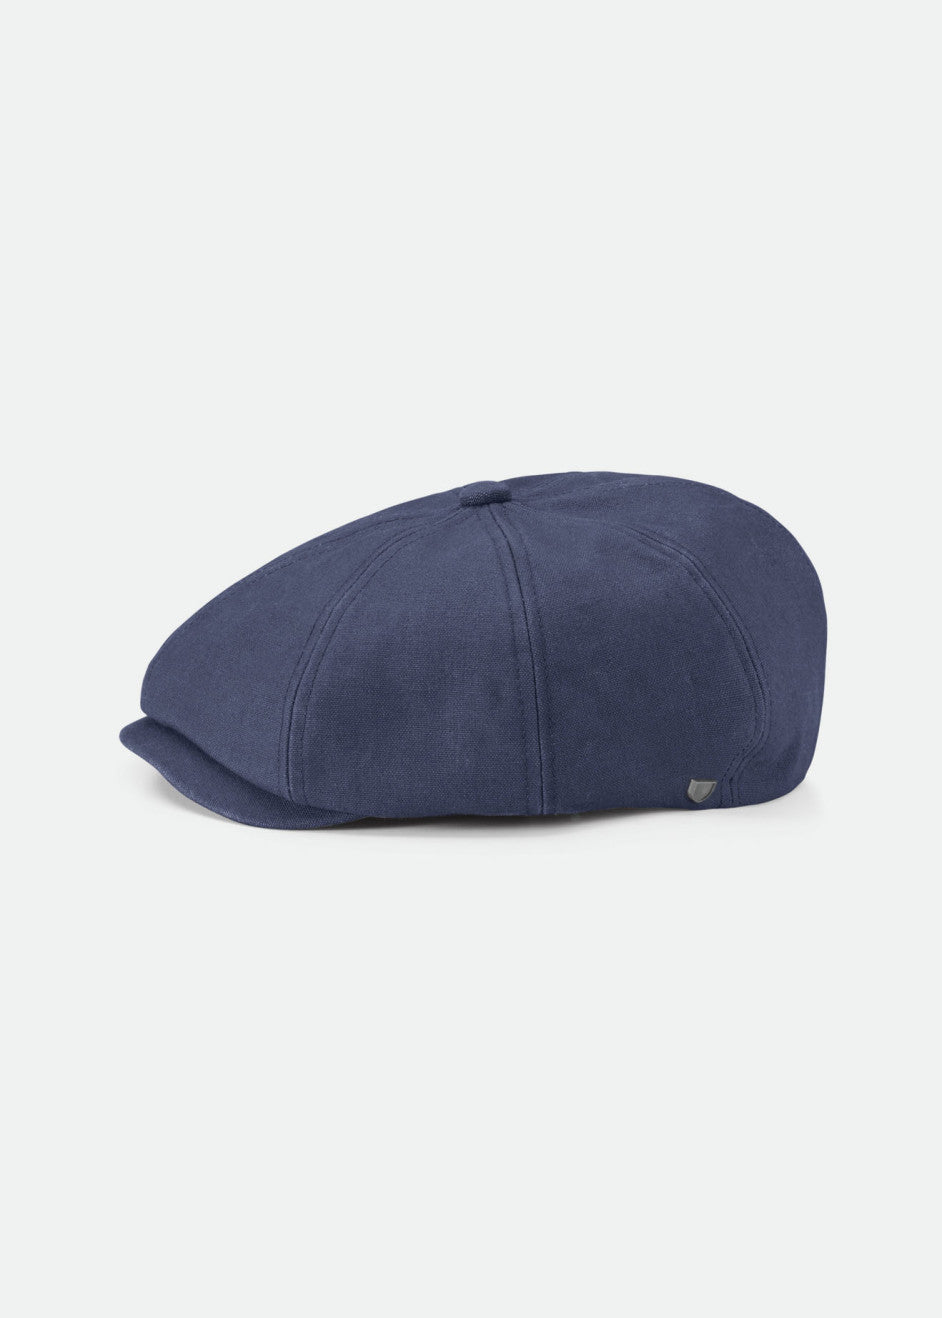 Brood Reserve Snap Cap - Washed Navy